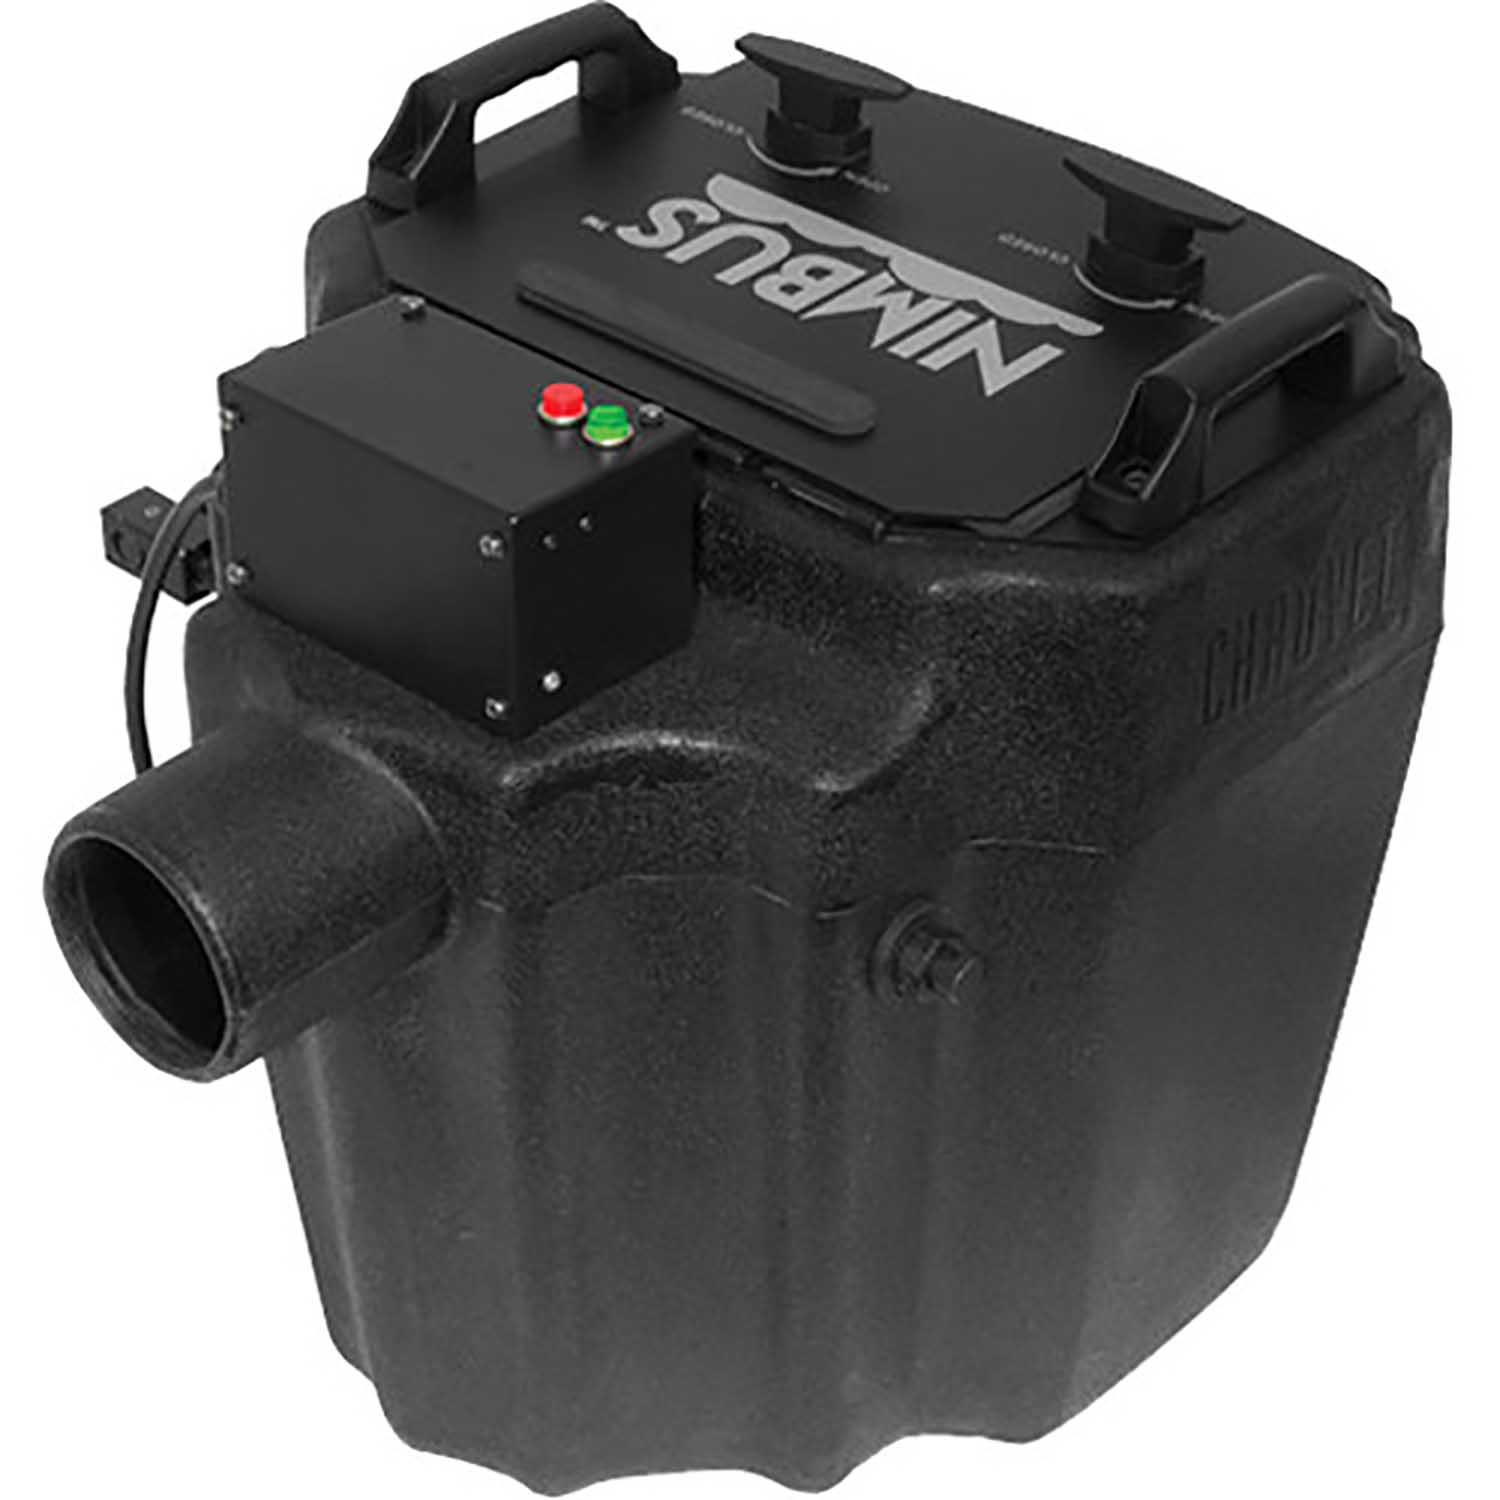 B-Stock: Chauvet DJ Nimbus Professional Dry Ice Machine with High and Low Settings - Hollywood DJ